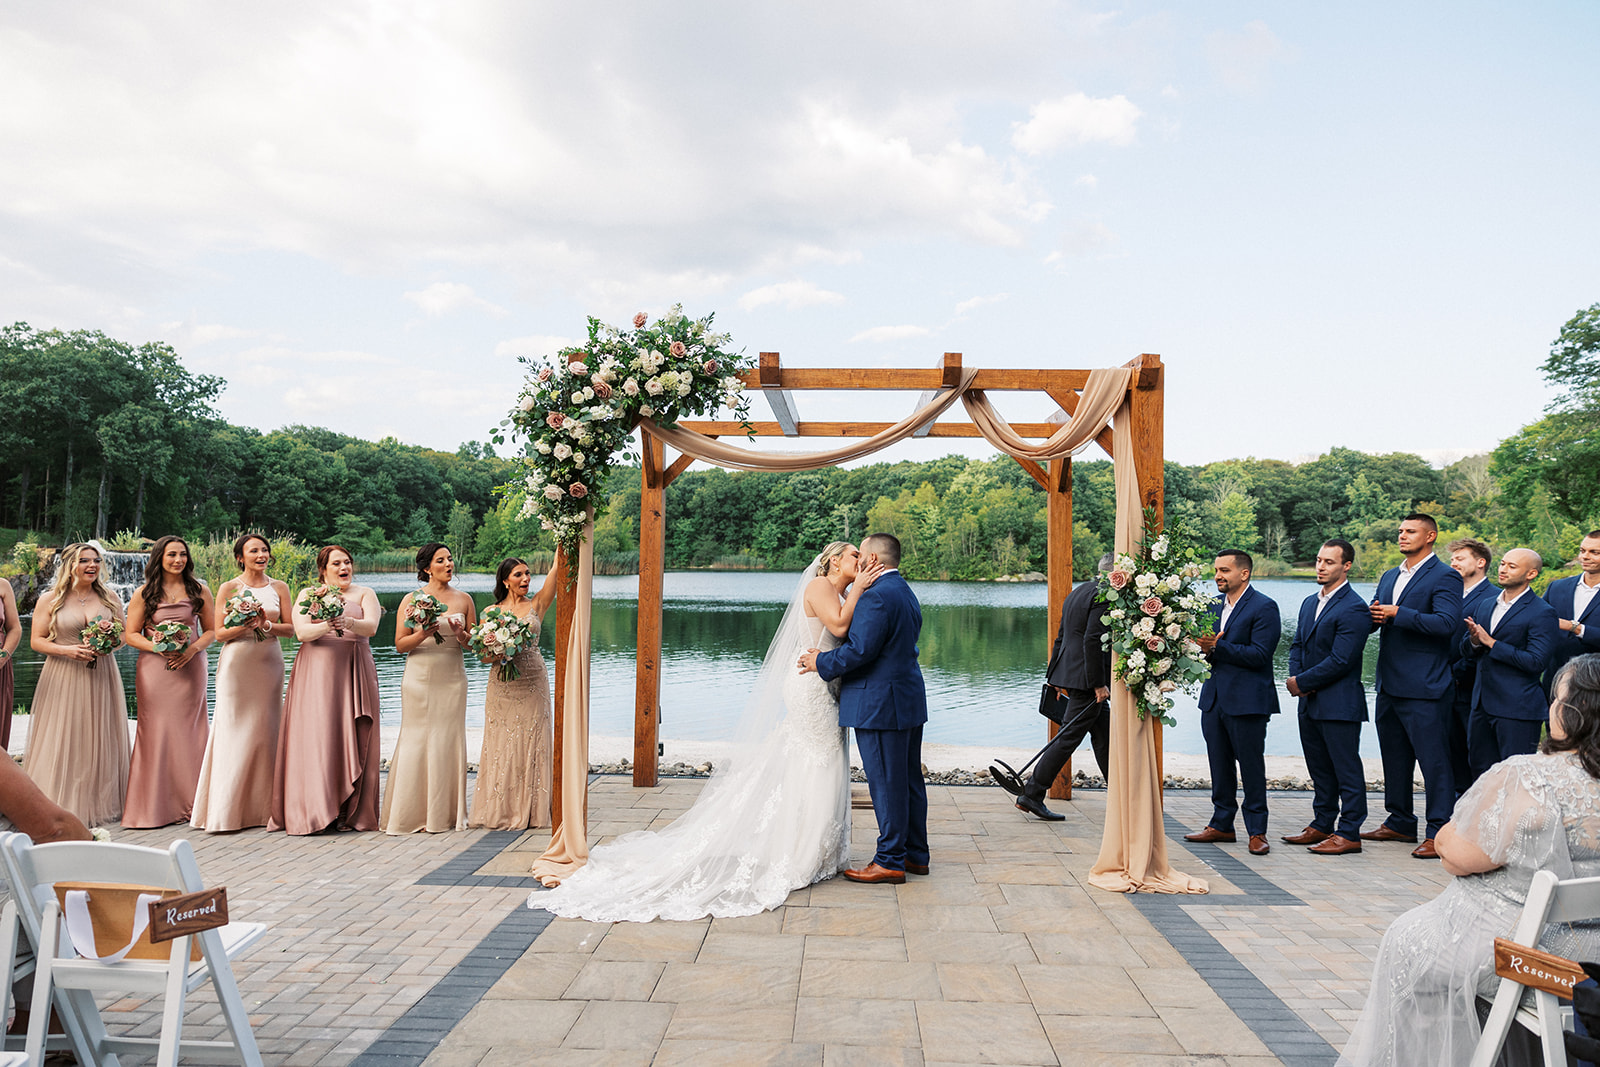 Newlyweds kiss under a large wooden arbor surrounded by their wedding party at a lakefront venue